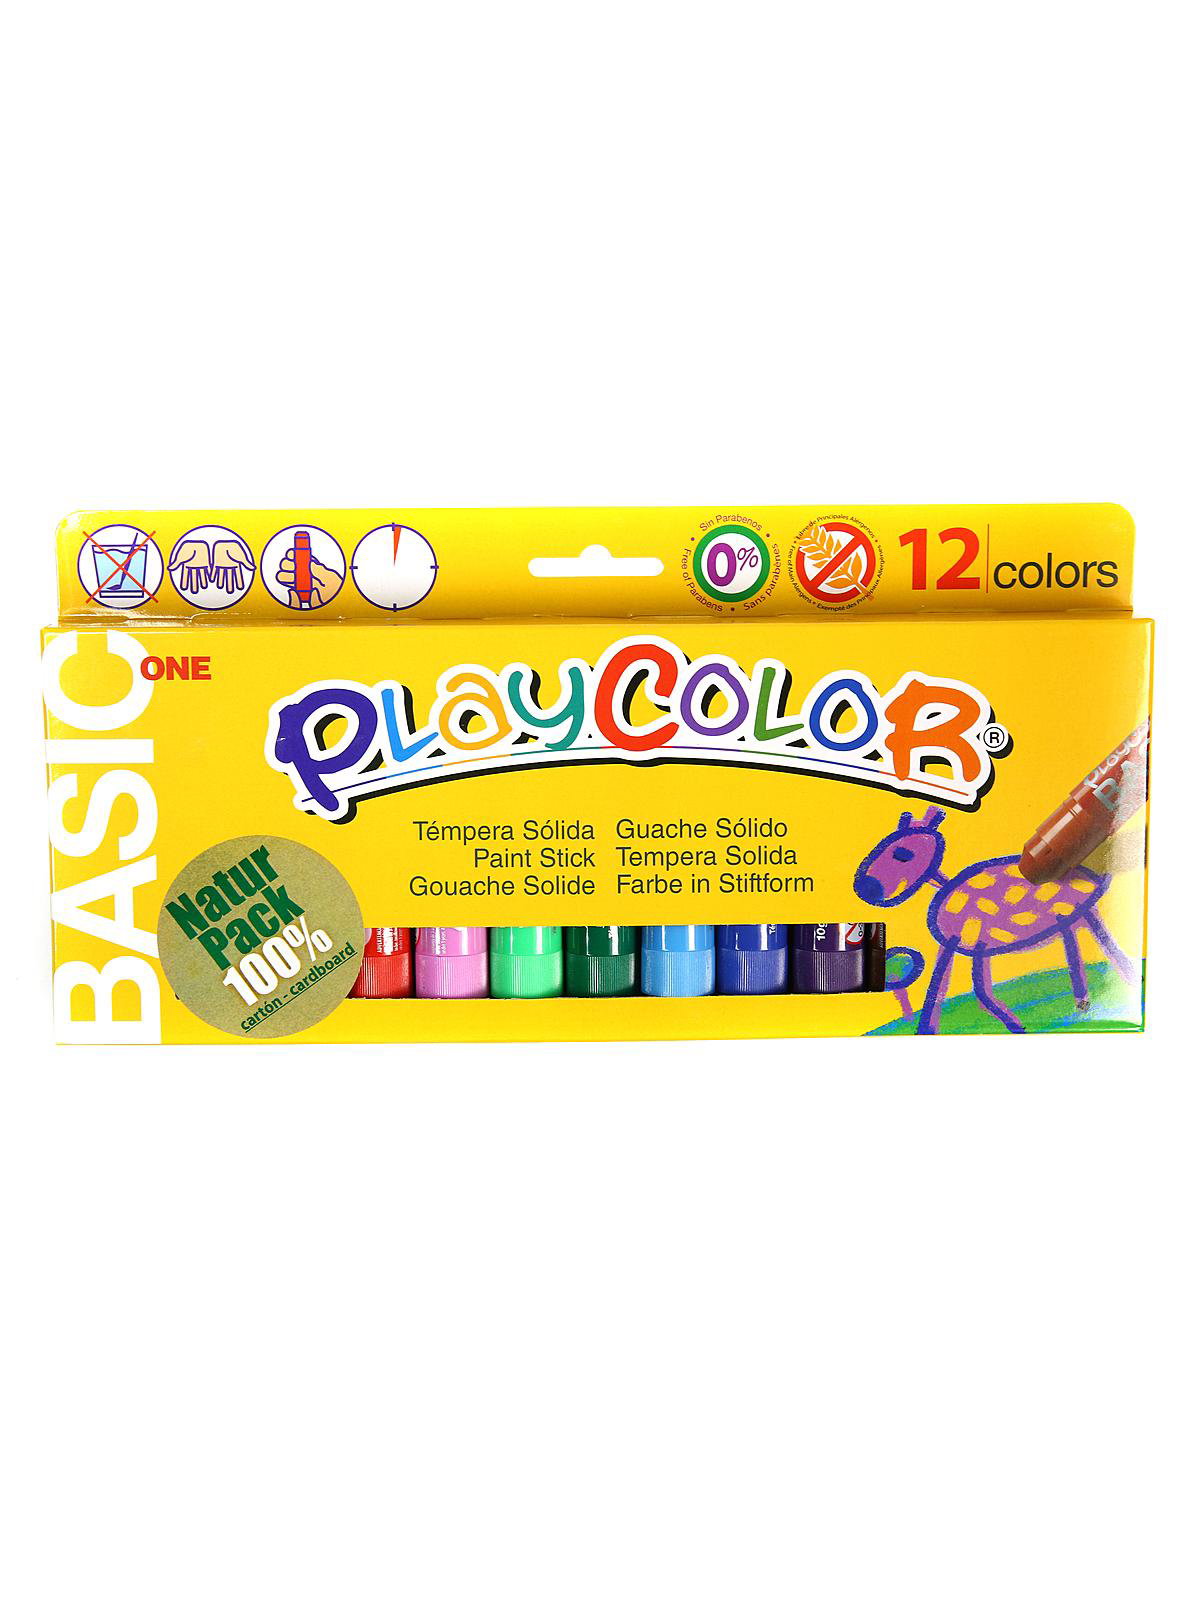 Playkidiz Paint Sticks, 6 Pack, Classic Colors, Twistable Crayon Paint  Sticks, Mess-Free Tempera & Poster Paint, Quick Drying, Great Birthday  Gift